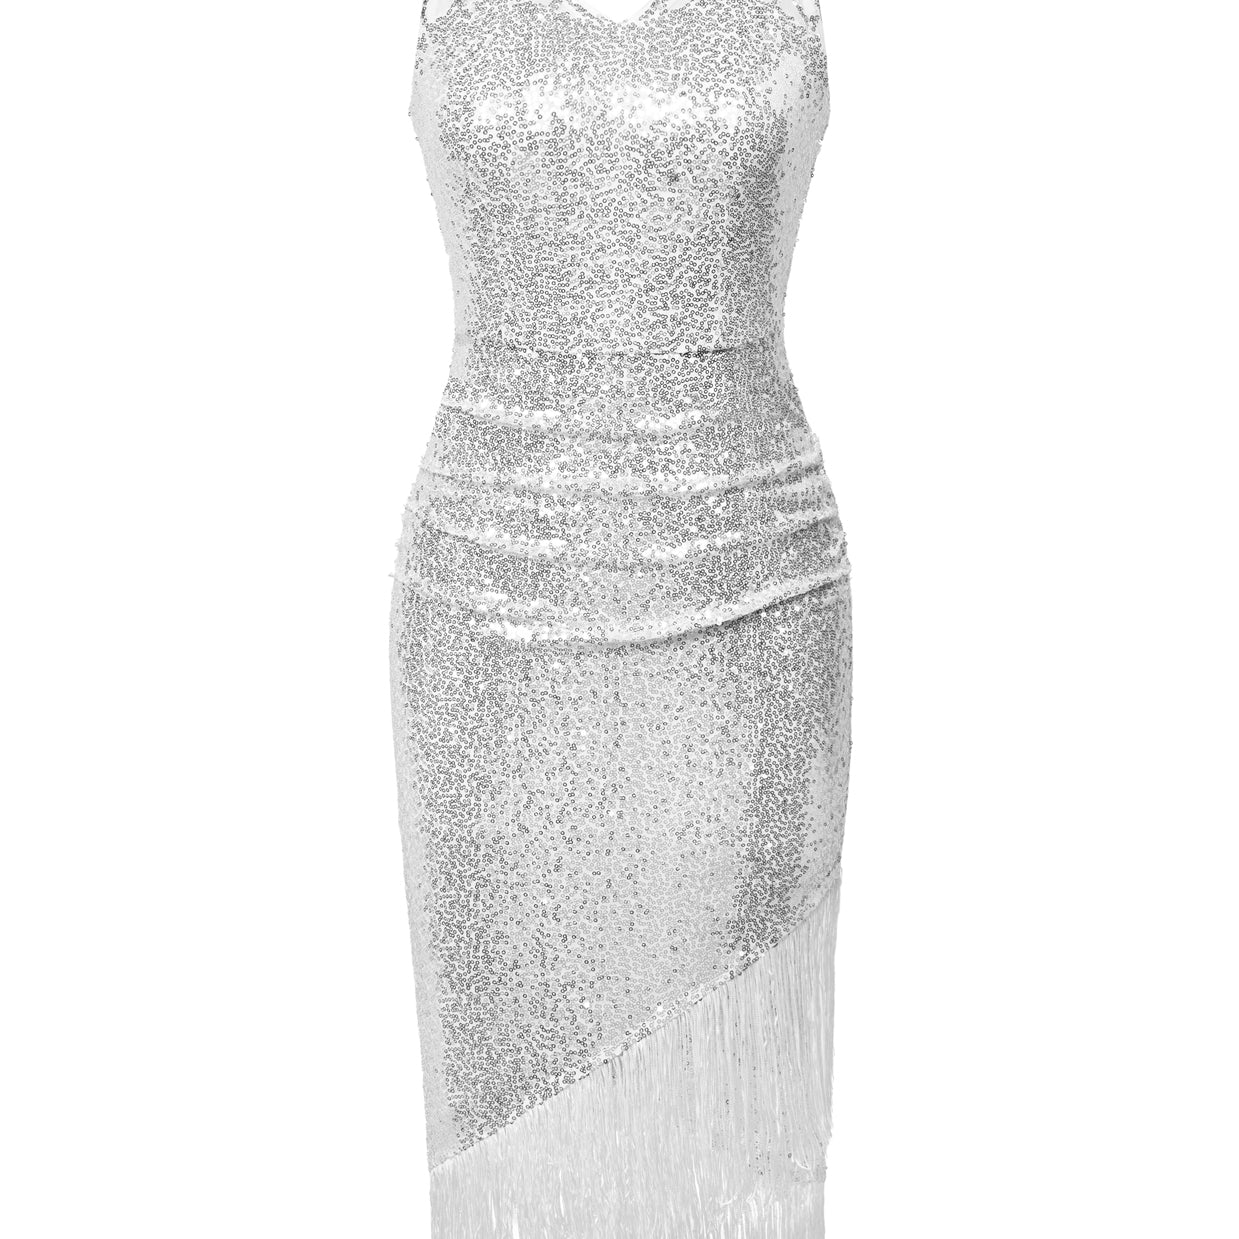 Seckill Offer⌛Sequin Dress Simple 1920s Flapper Cocktail Party Dresses